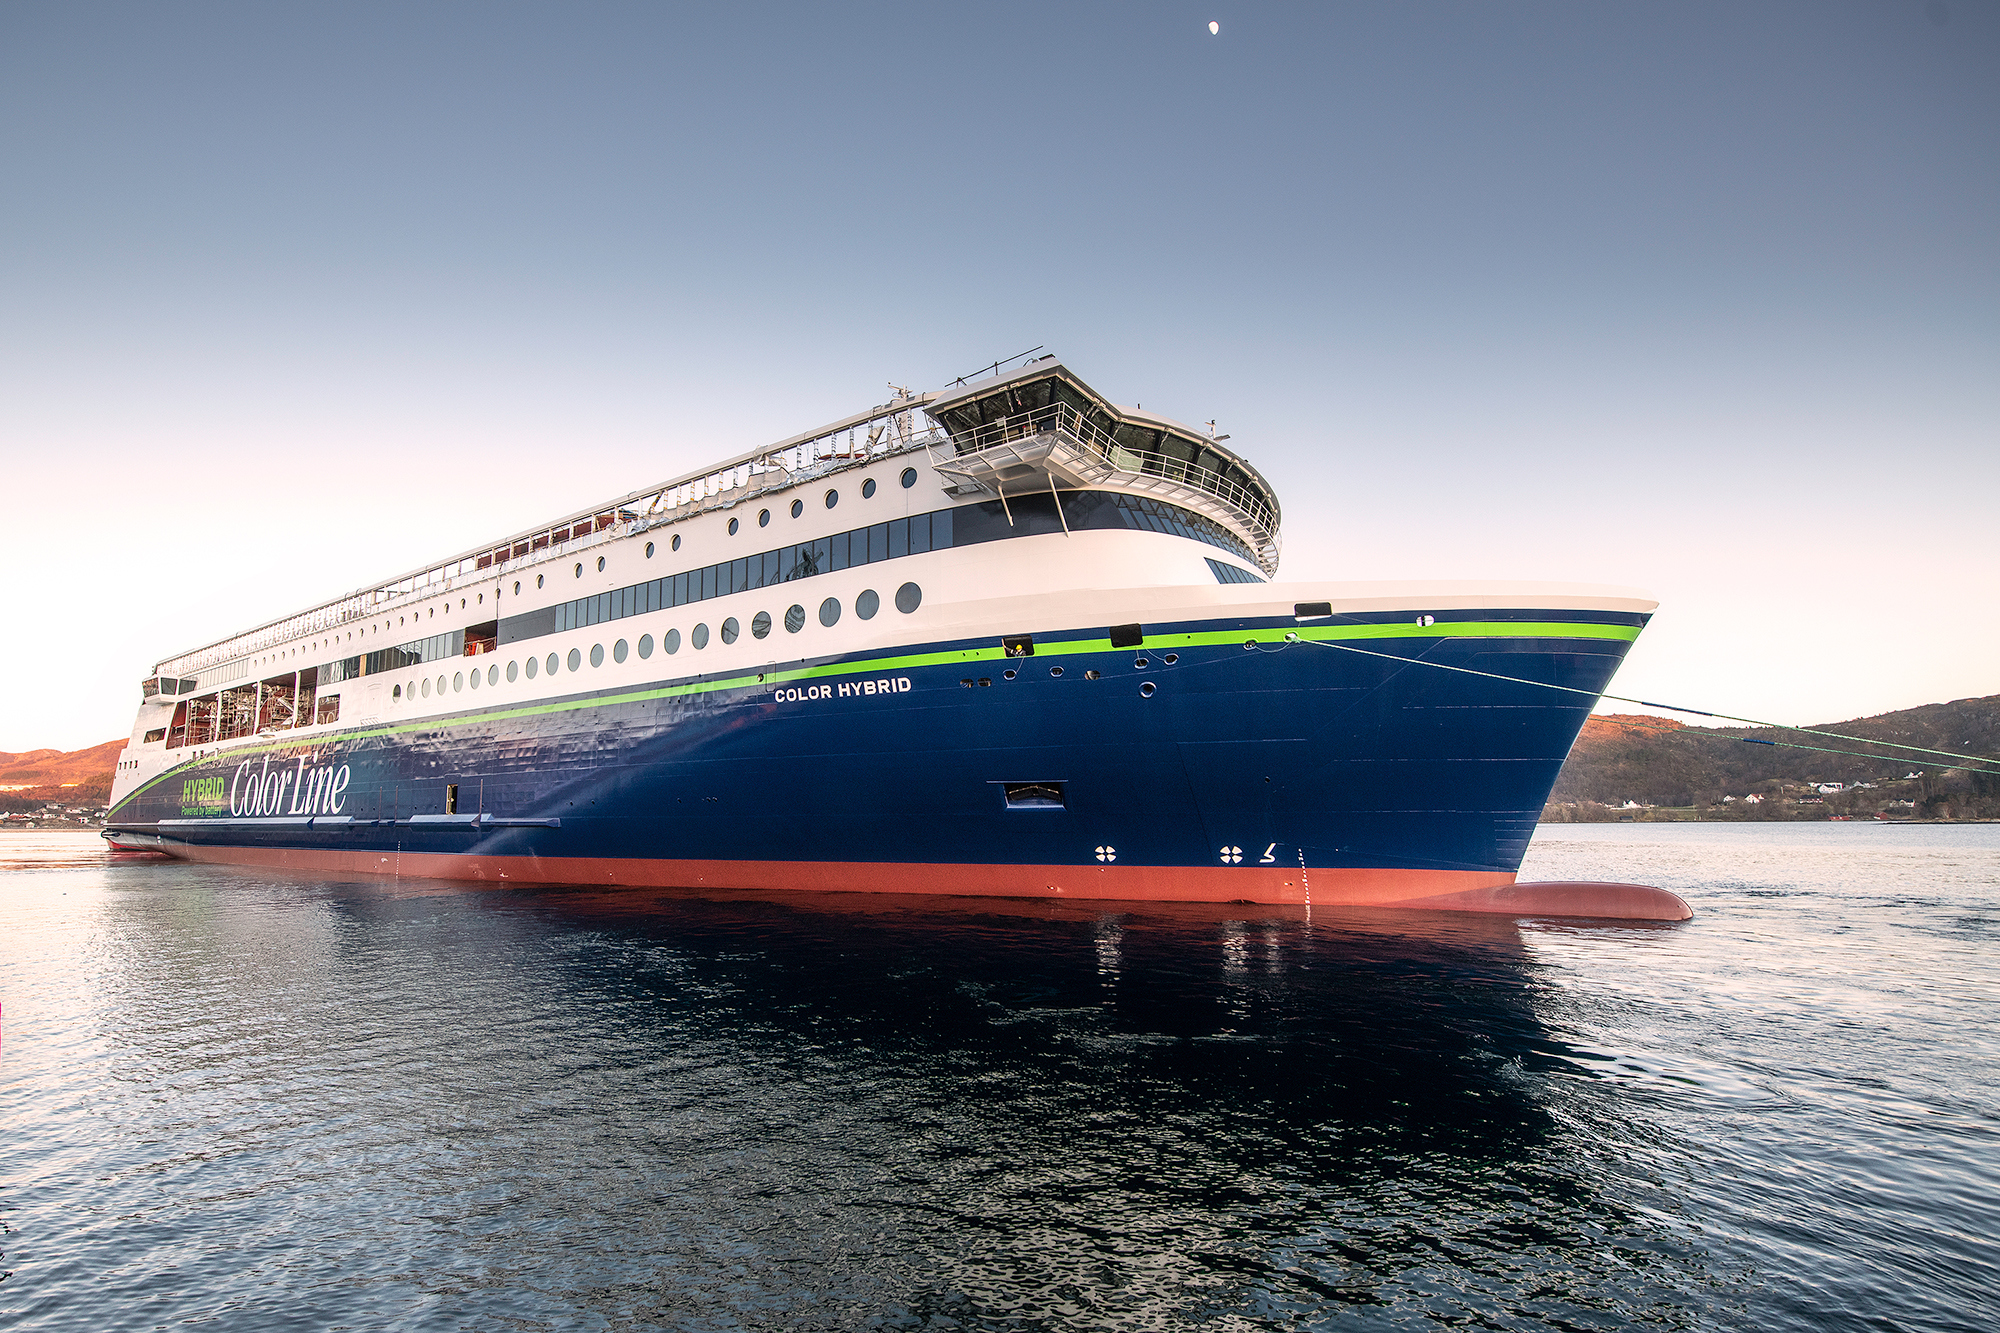 'Color Hybrid' at her launch from the dock hall at Ulstein Verft in April 2019. Photo: Per Eide Studio.